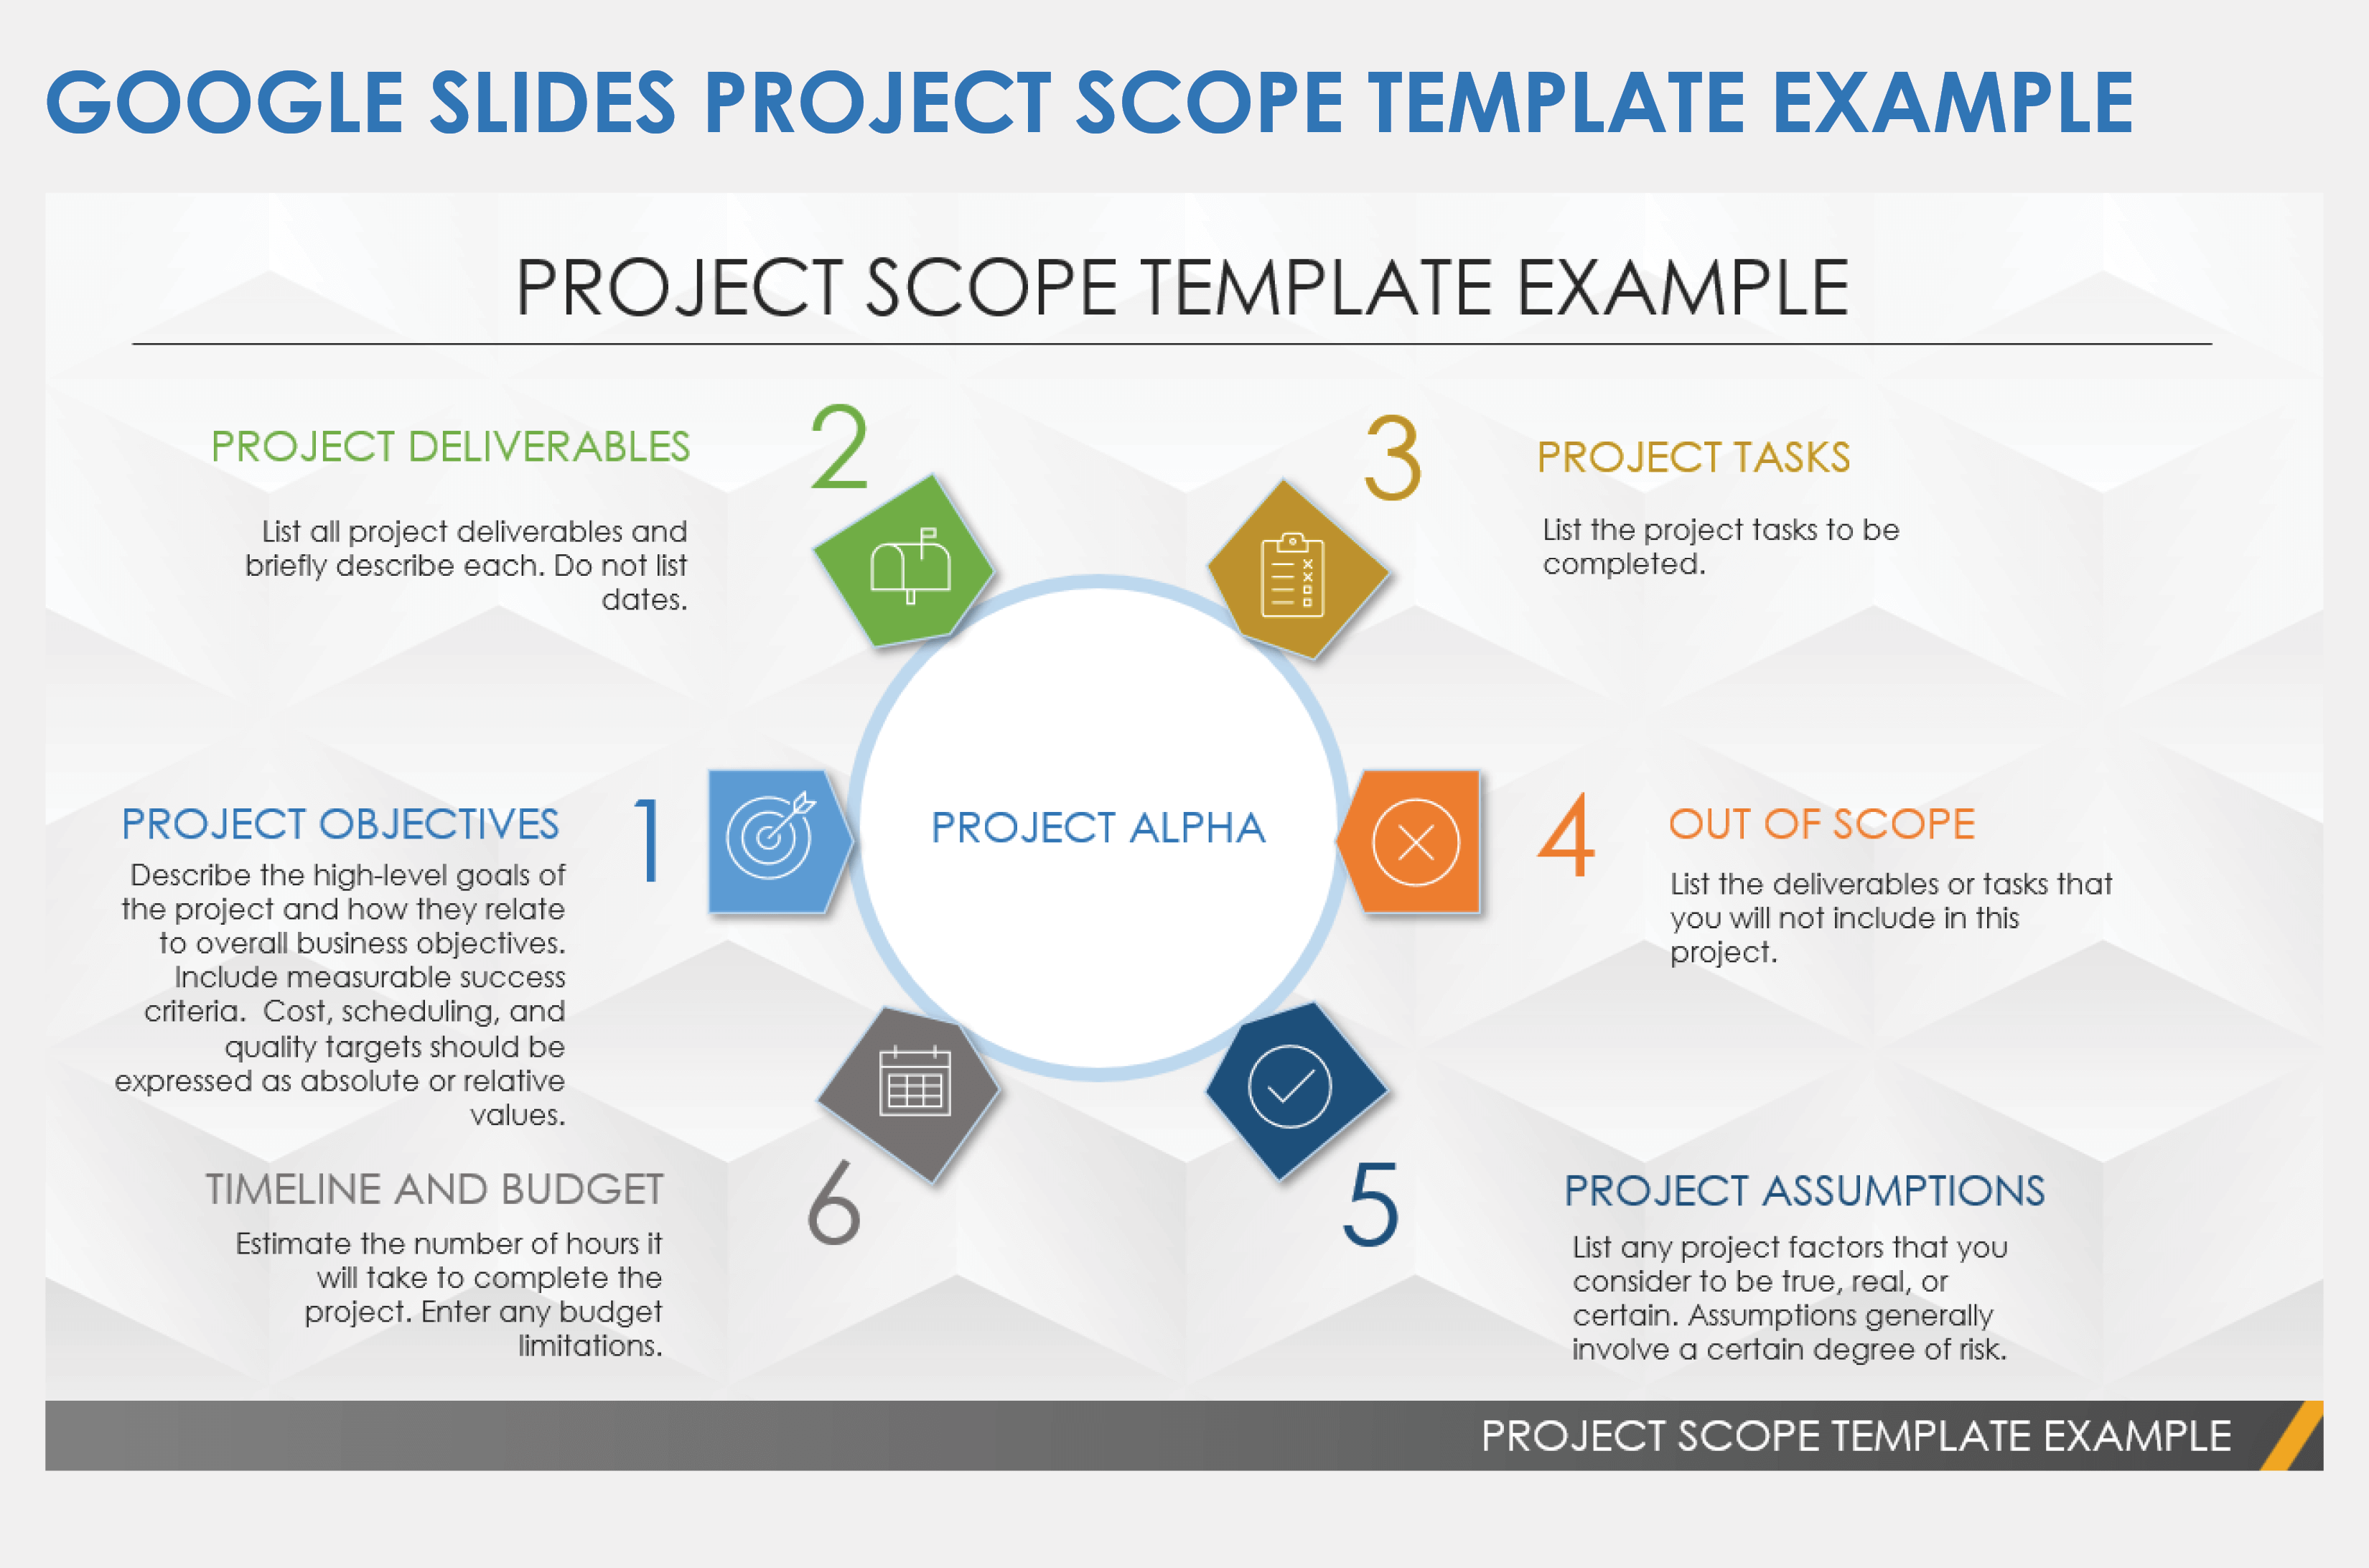 Project Scope Example Template Google Slides